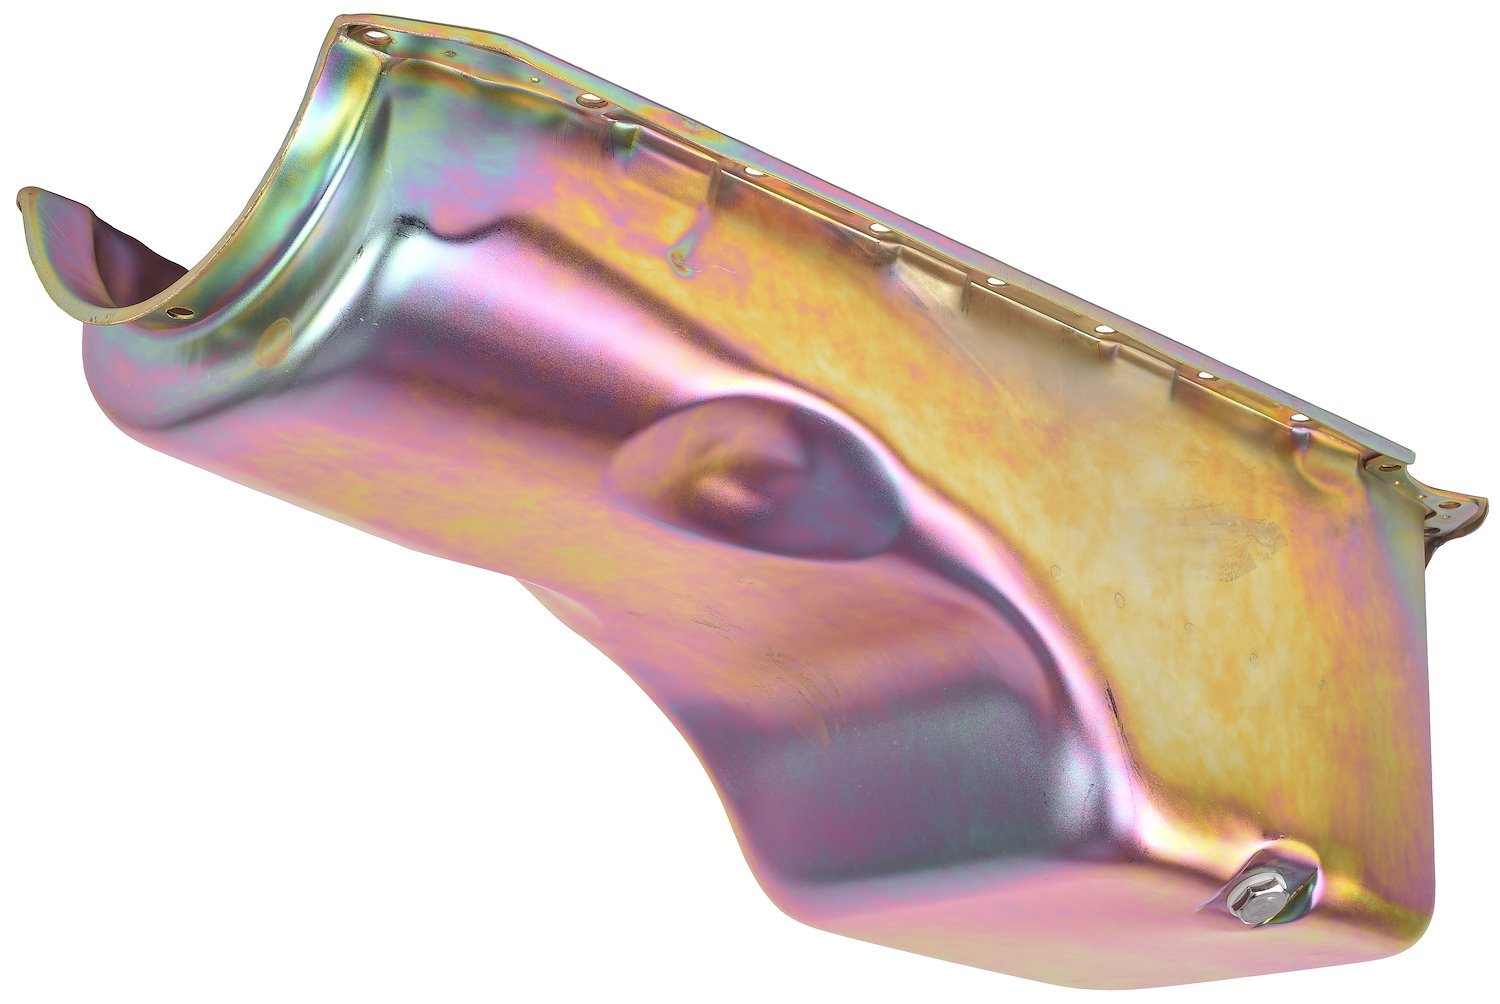 Stock-Style Replacement Oil Pan for 1964-1990 Big Block Chevy Mark IV [Gold Zinc Dichromate Finish]